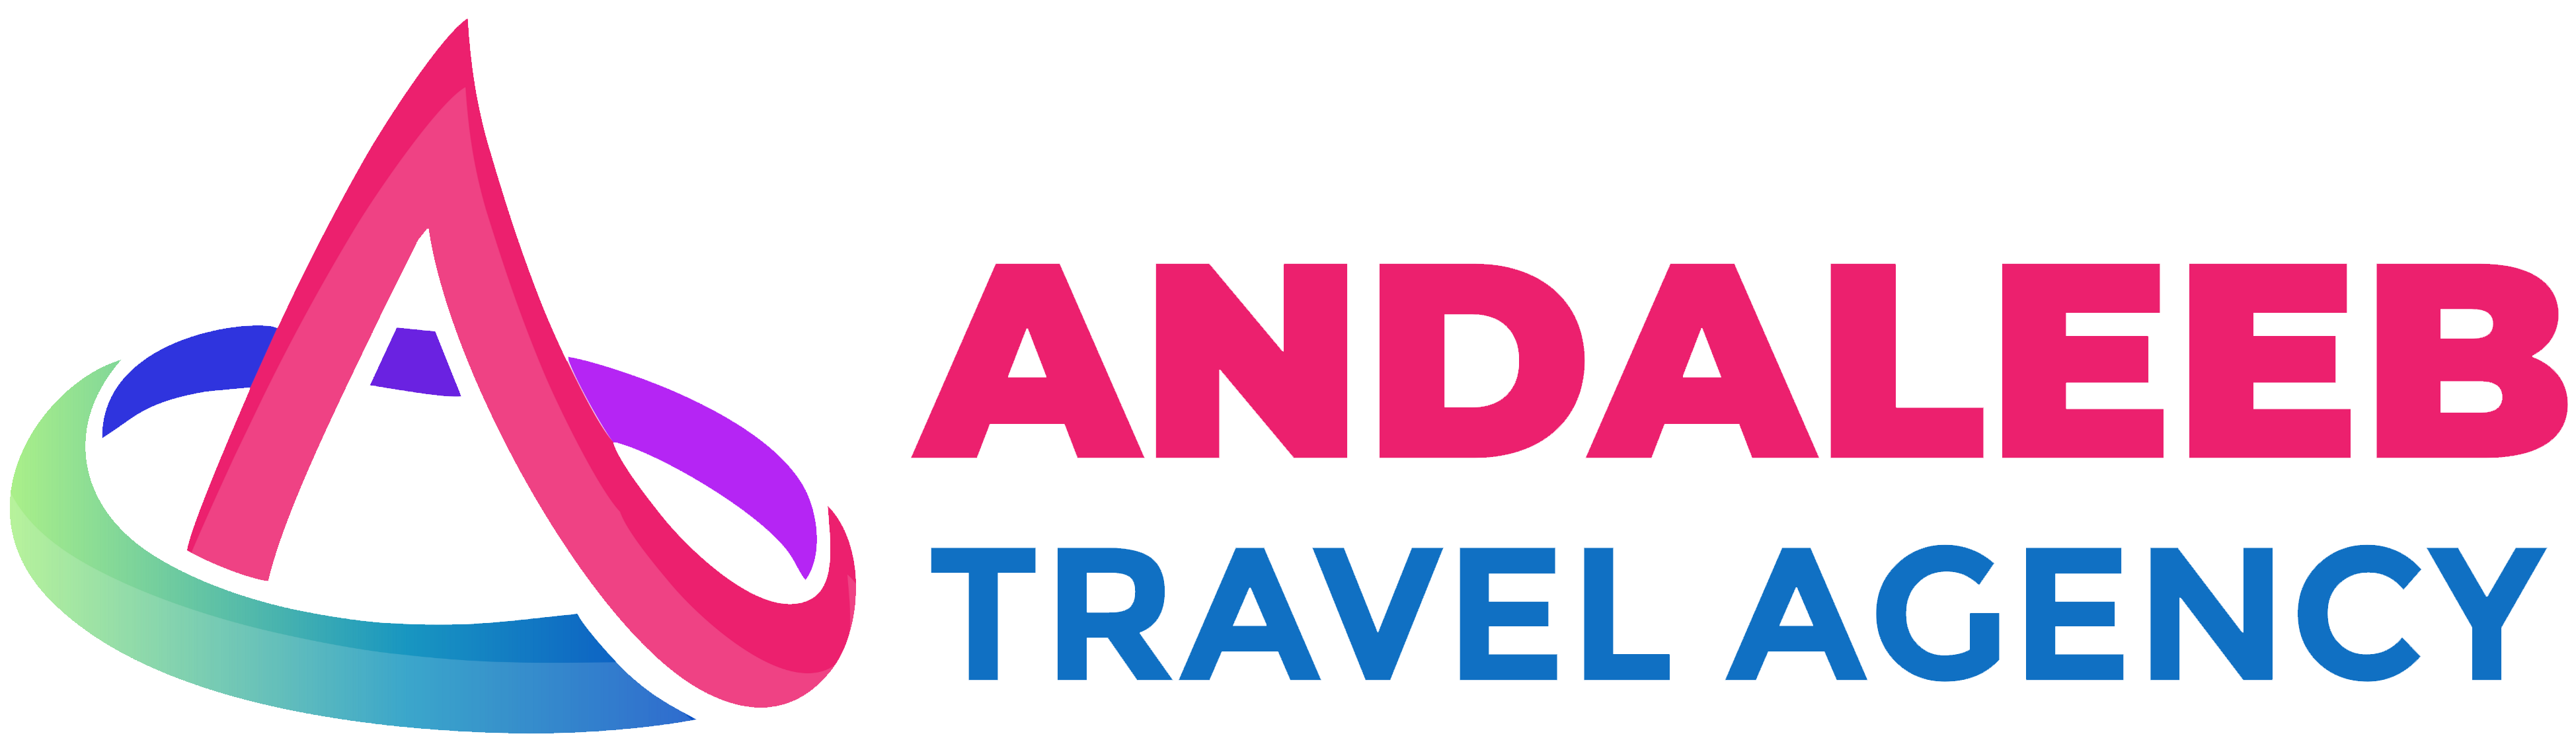 Andaleeb Travel Agency